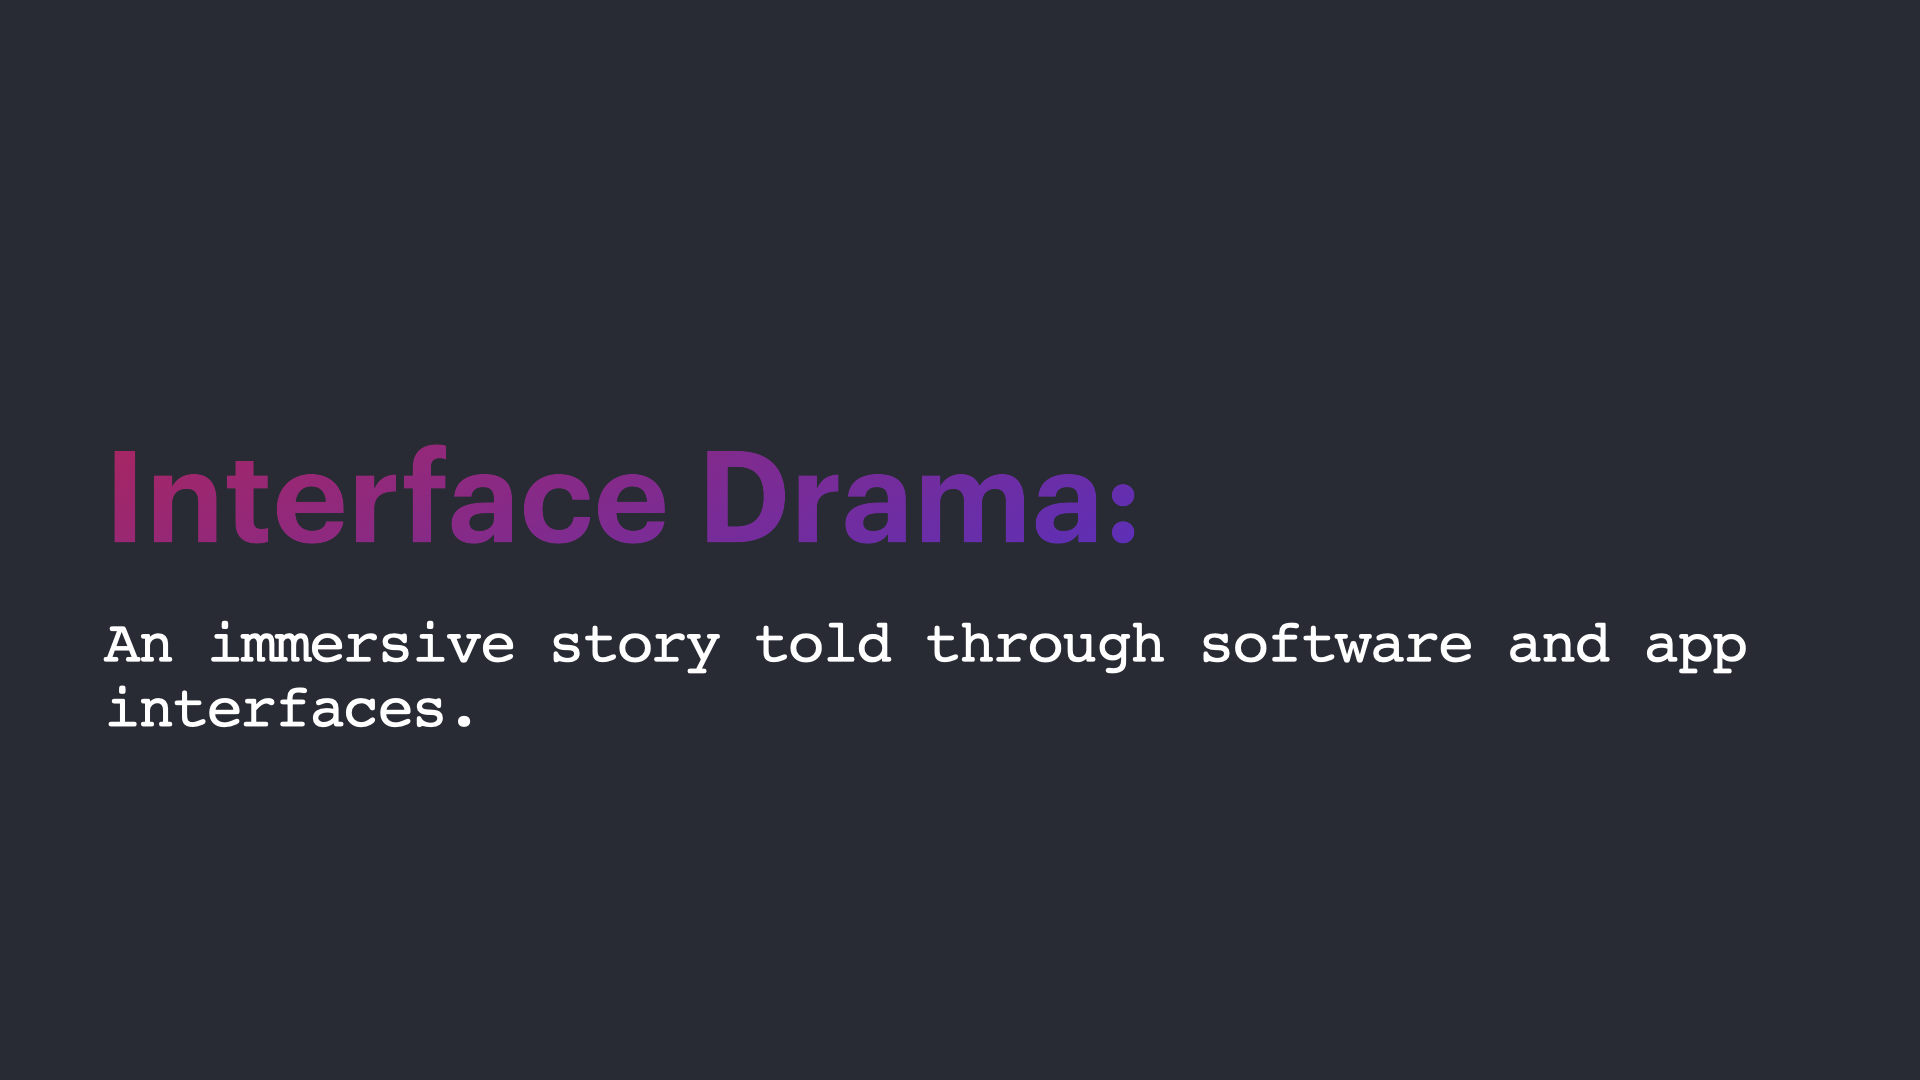 Text: Interface dramas - an immersive story told through software and app interfaces.